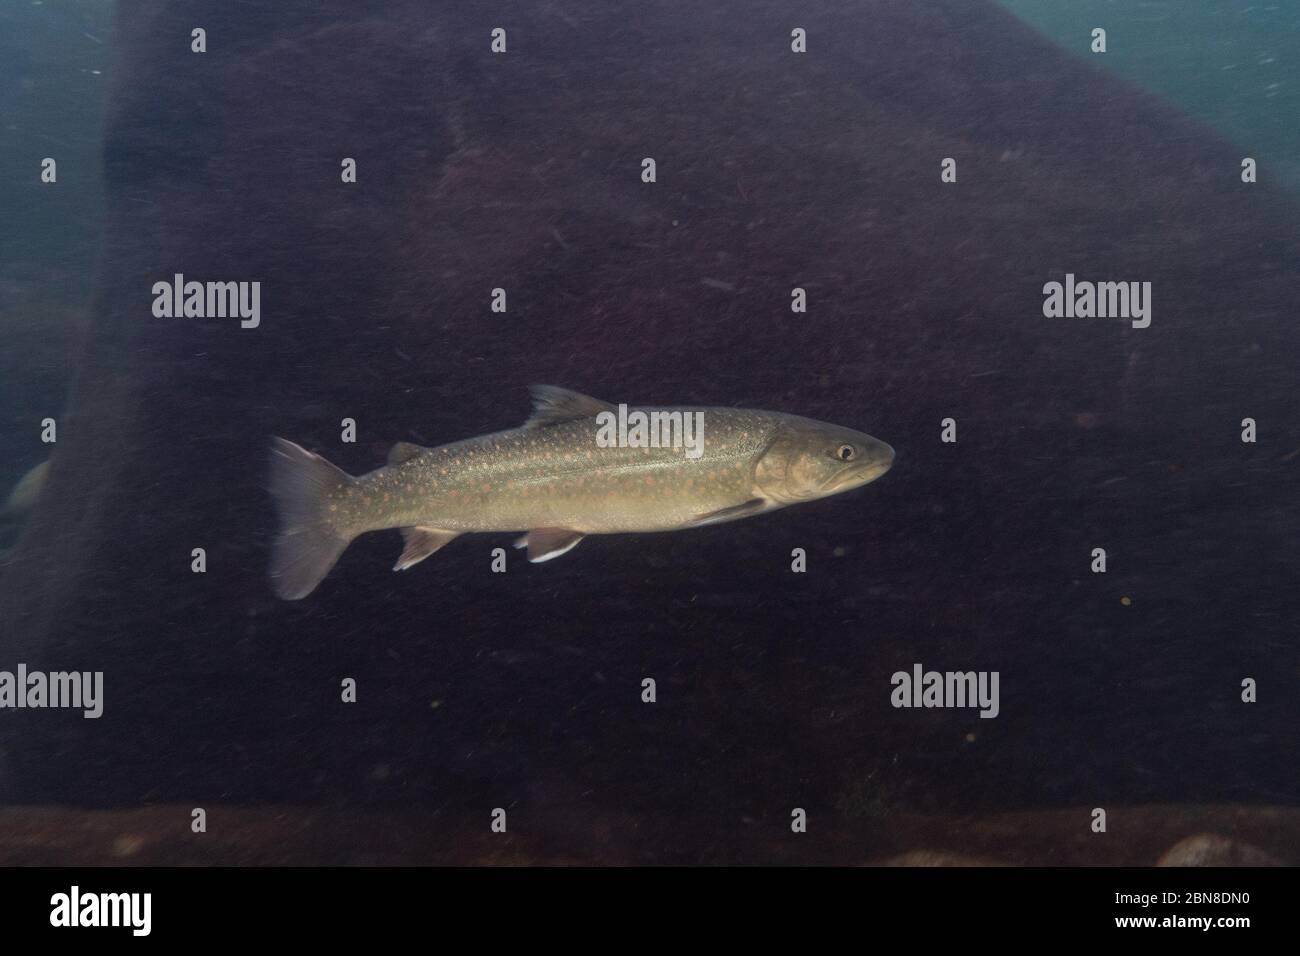 Adult Bull trout in Southern British Columbia, Canada. Stock Photo